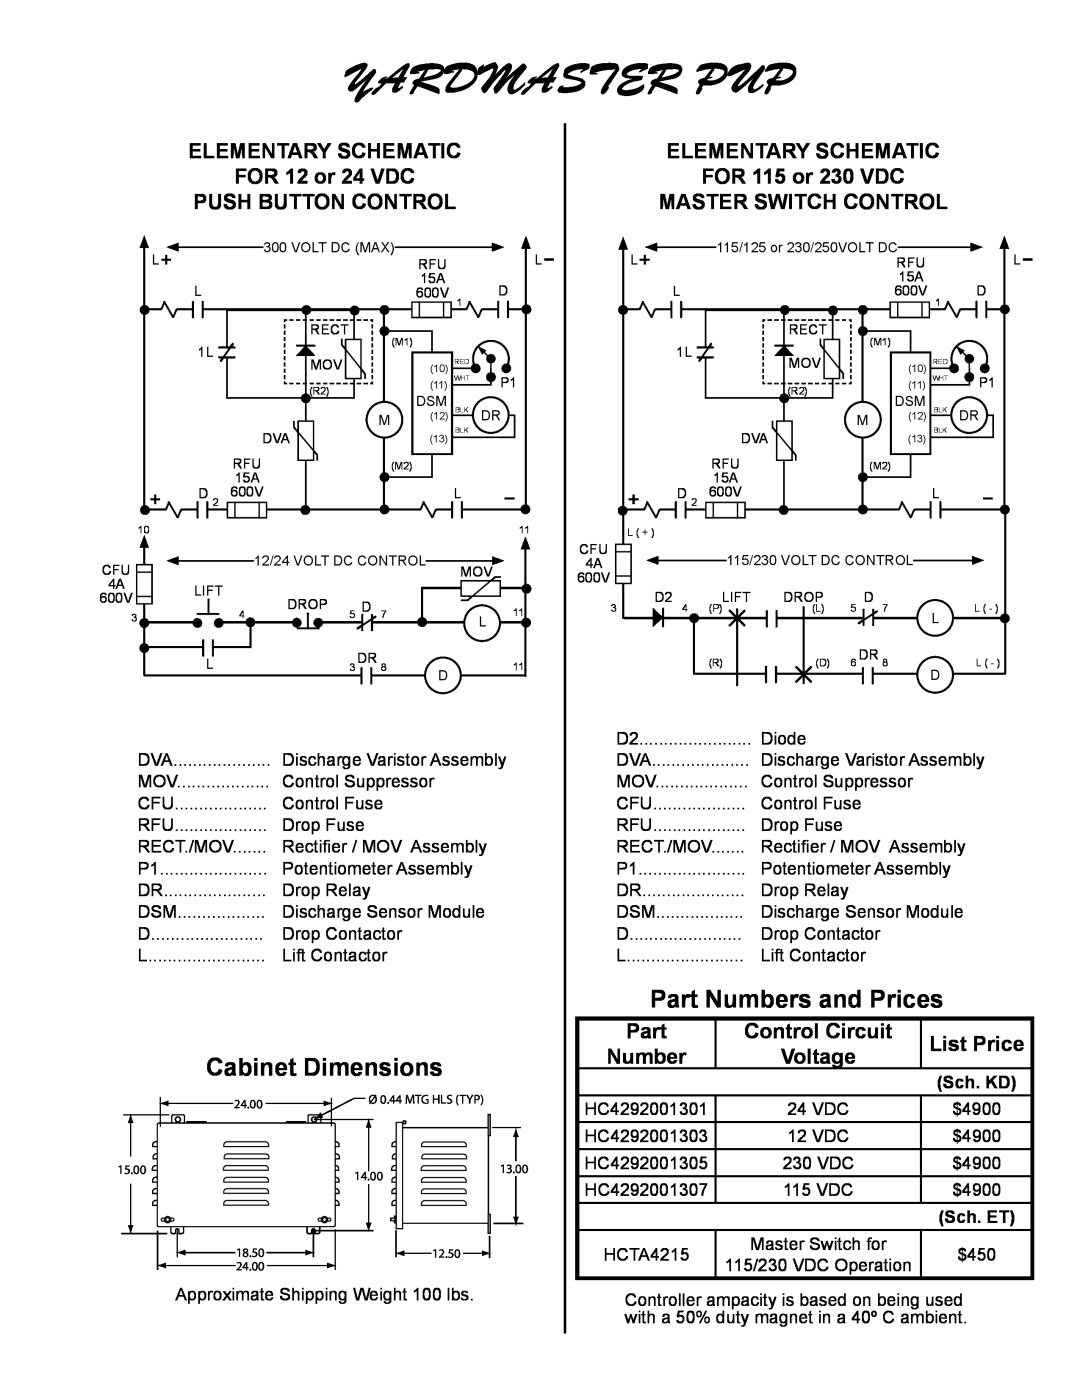 Hubbell 4292P Elementary Schematic, FOR 115 or 230 VDC, Push Button Control, Master Switch Control, Voltage, Part, Number 